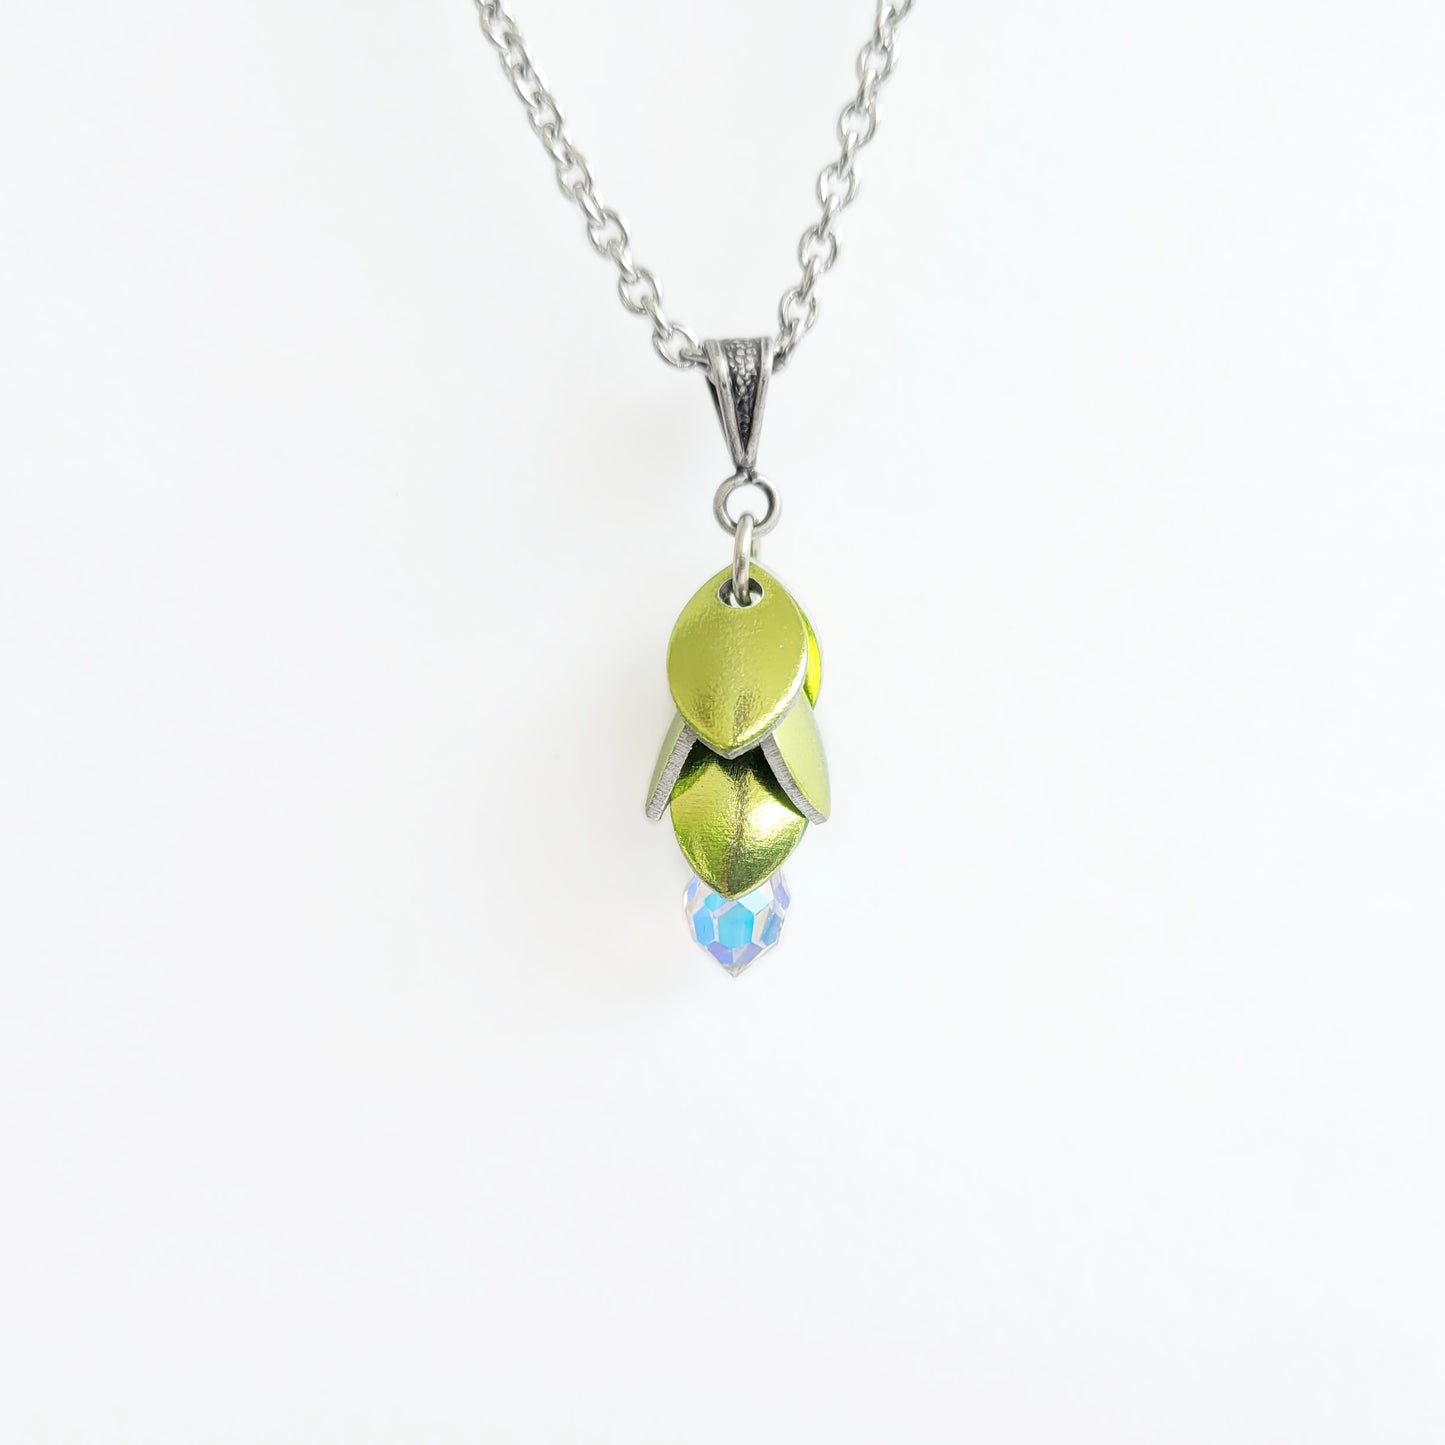 Lily Pad Necklace